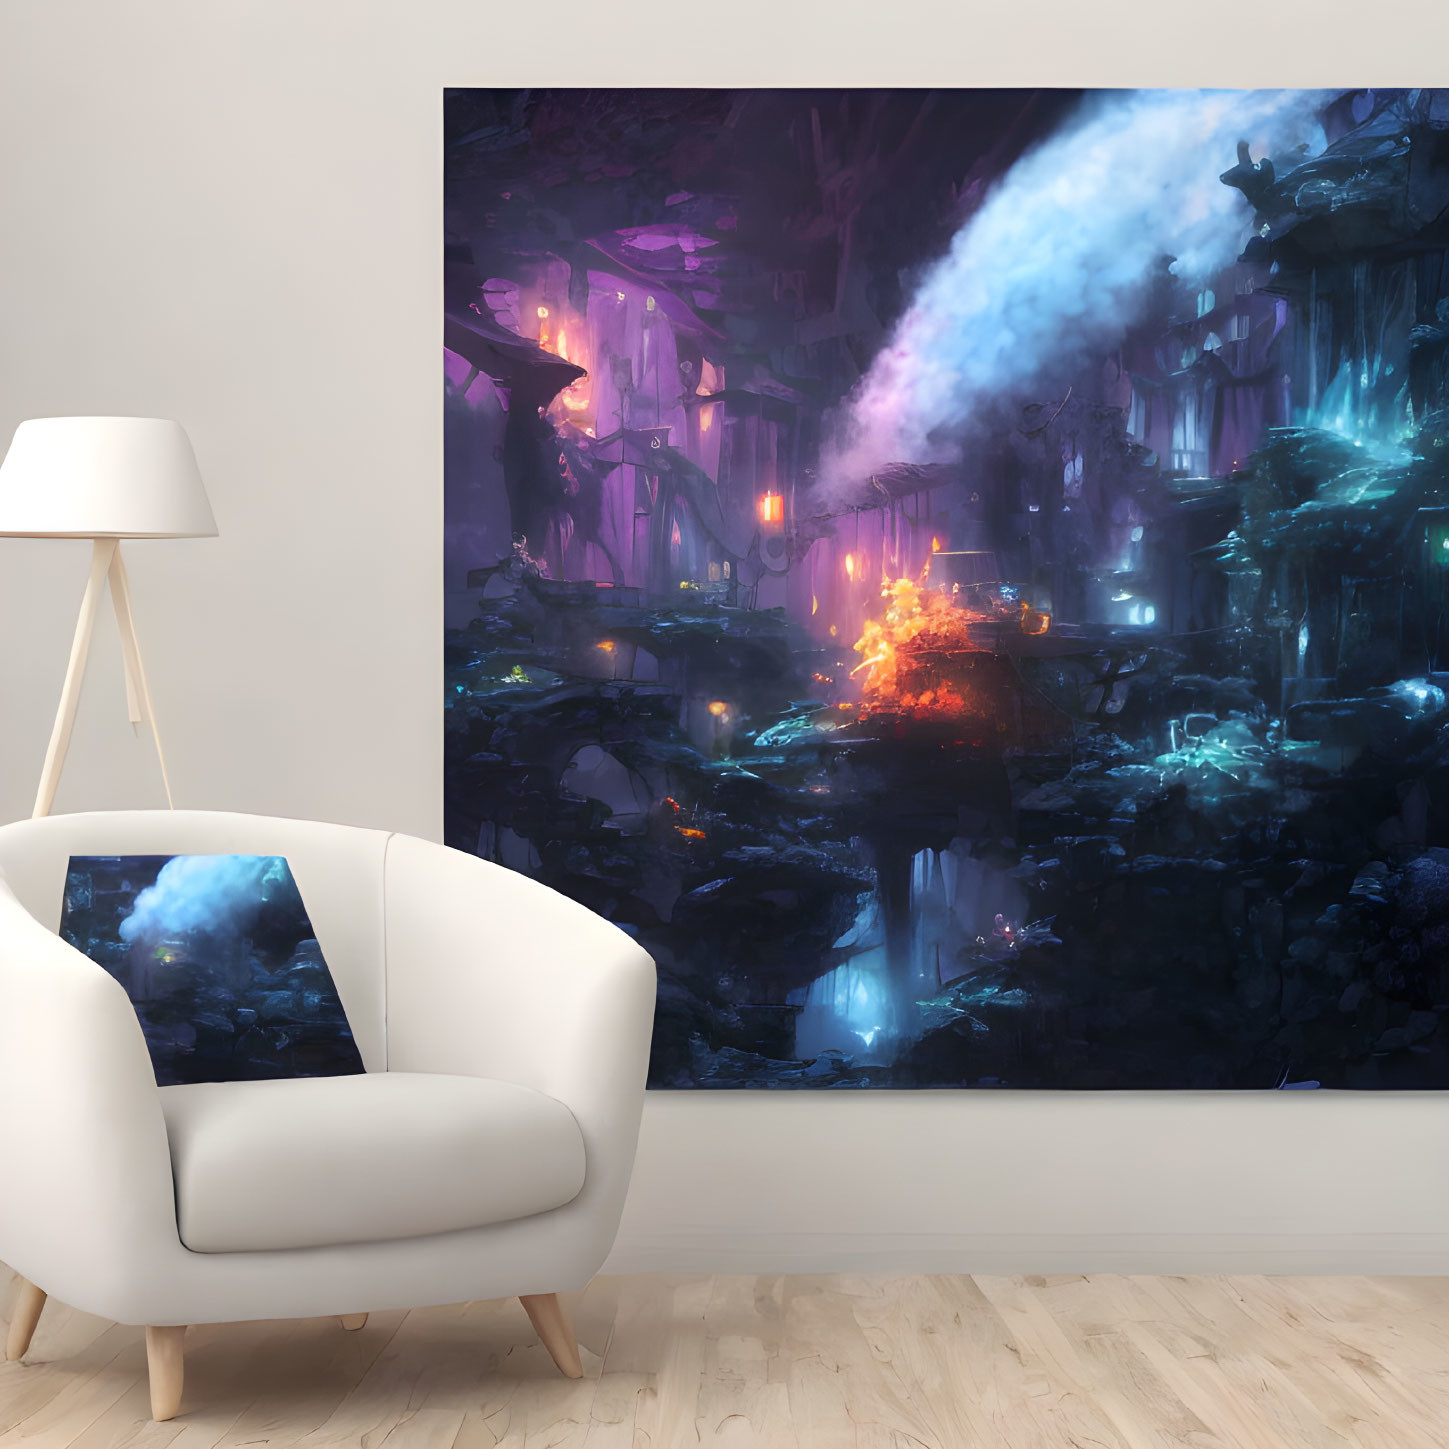 Colorful Fantasy Canvas in Modern Living Room with Mystical Cave Theme